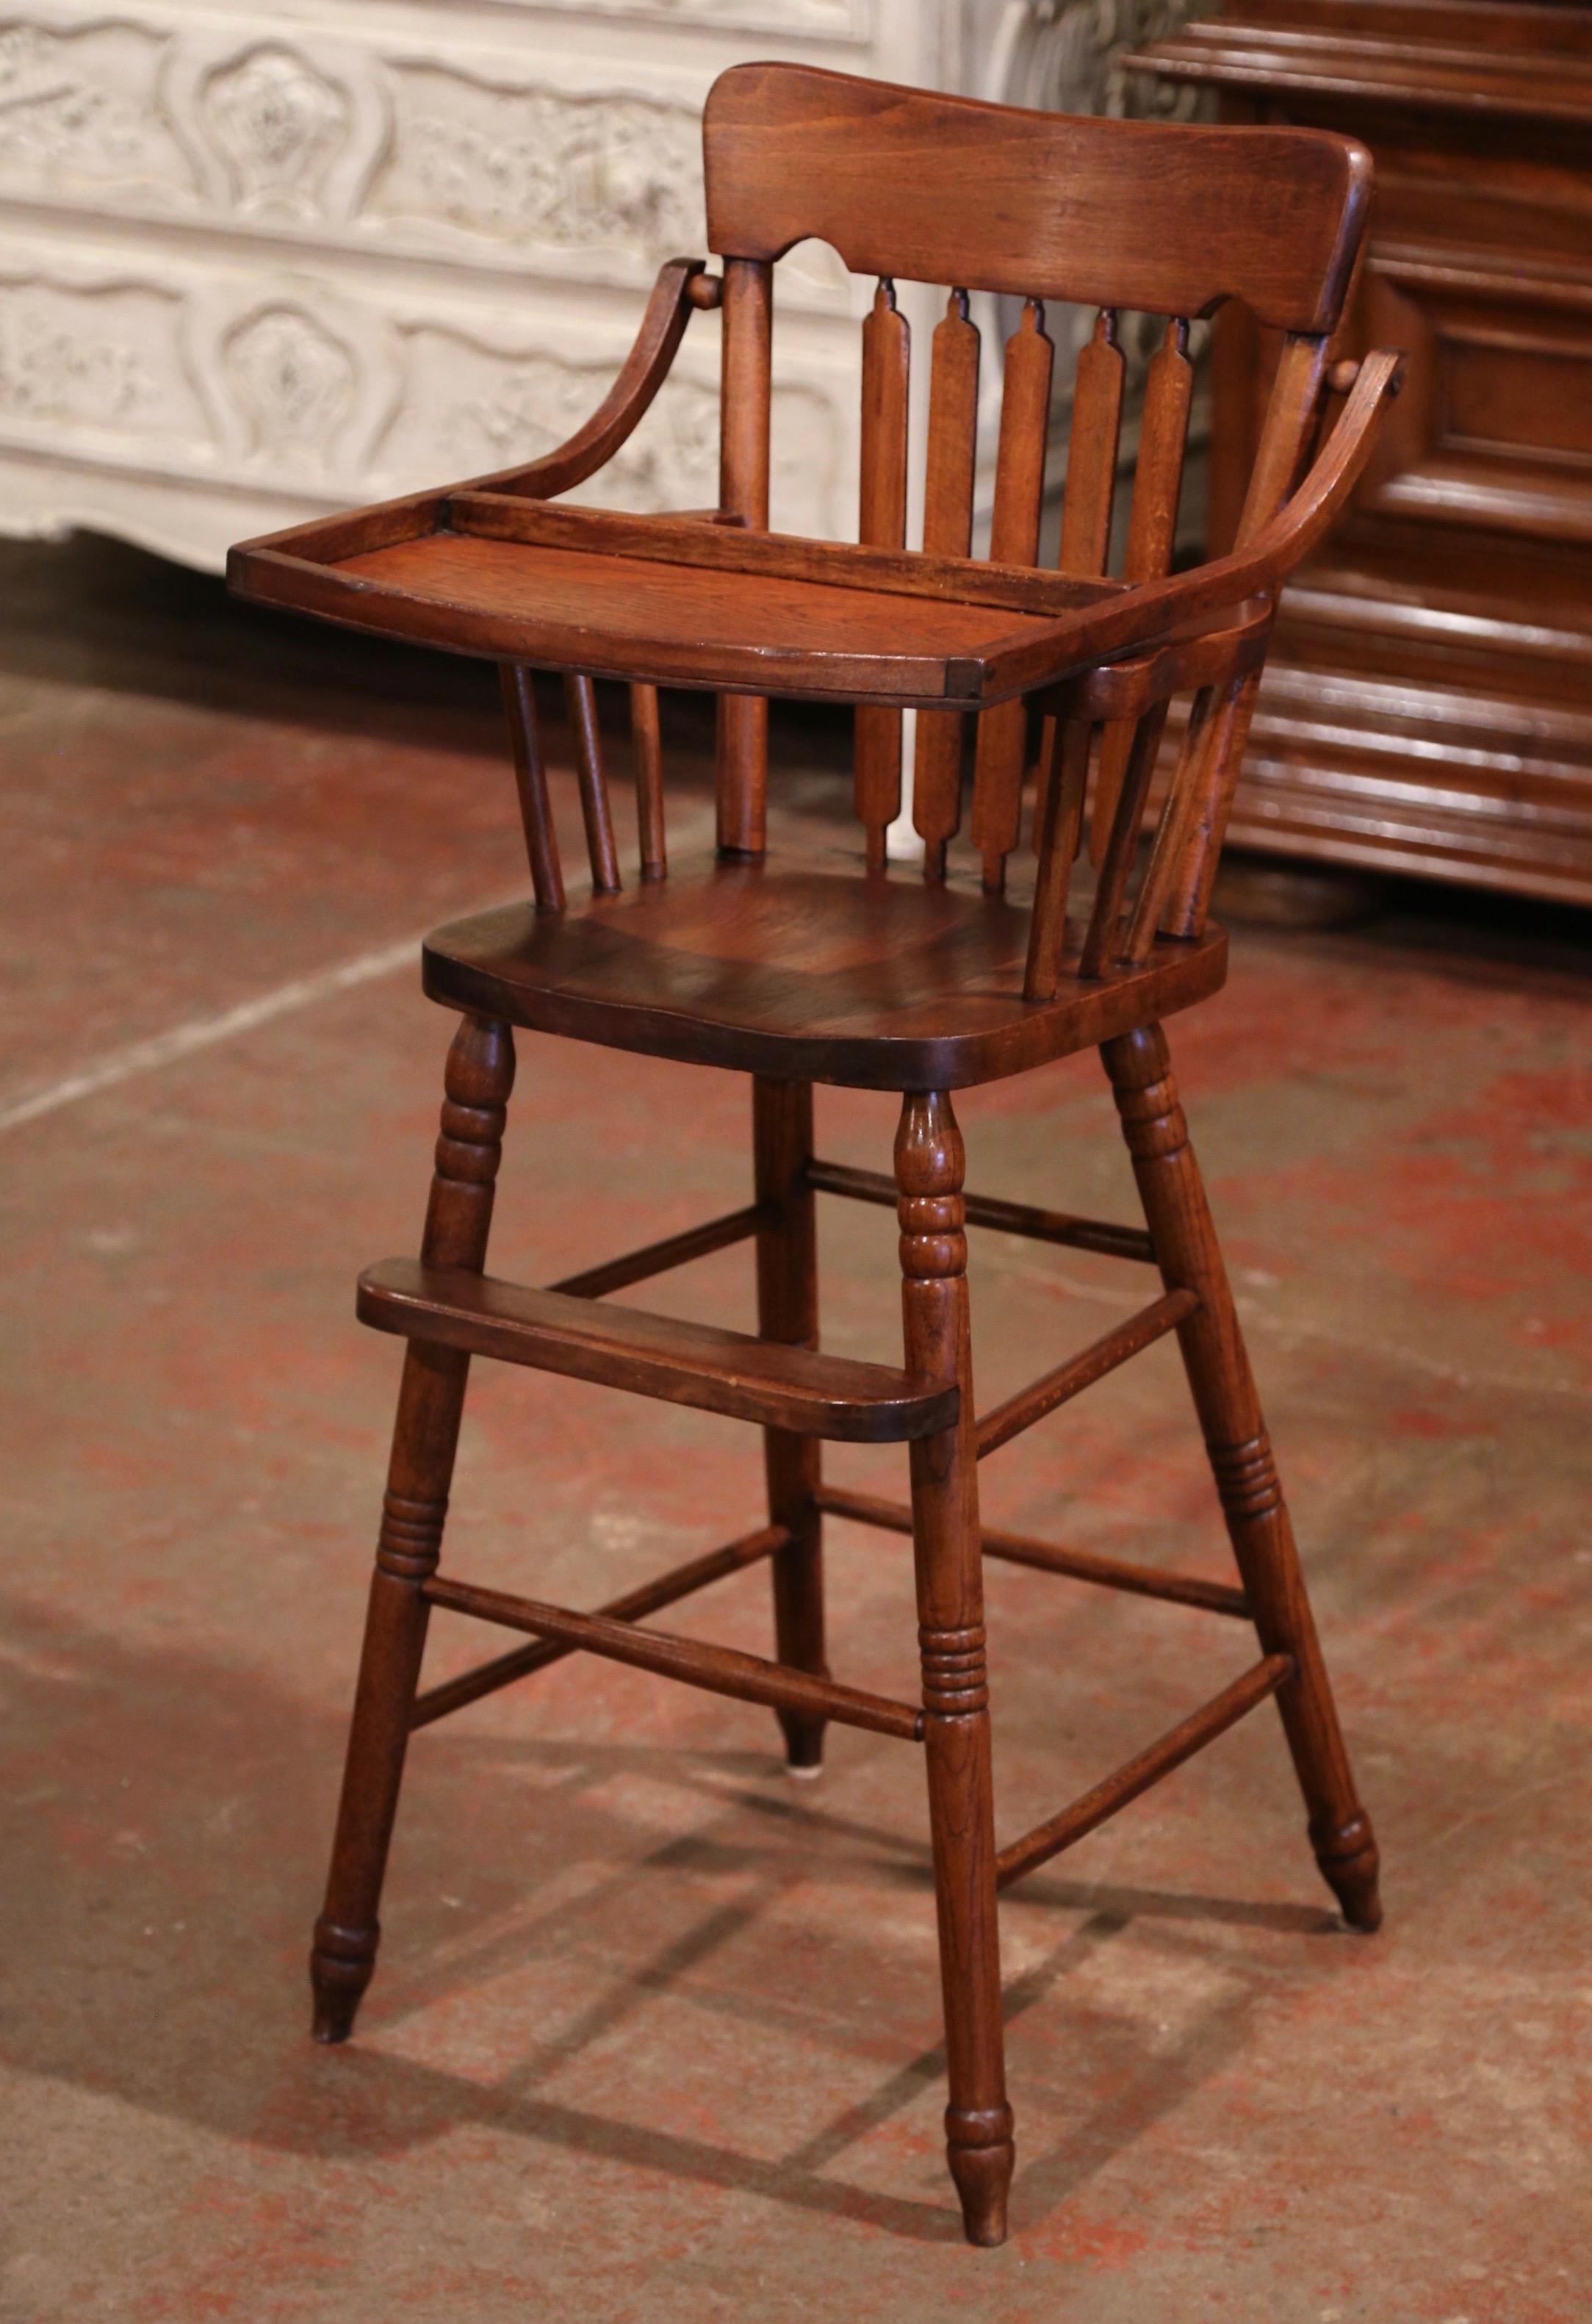 Hand-Crafted Mid-20th Century English Carved Oak Ladder Back Child High Chair